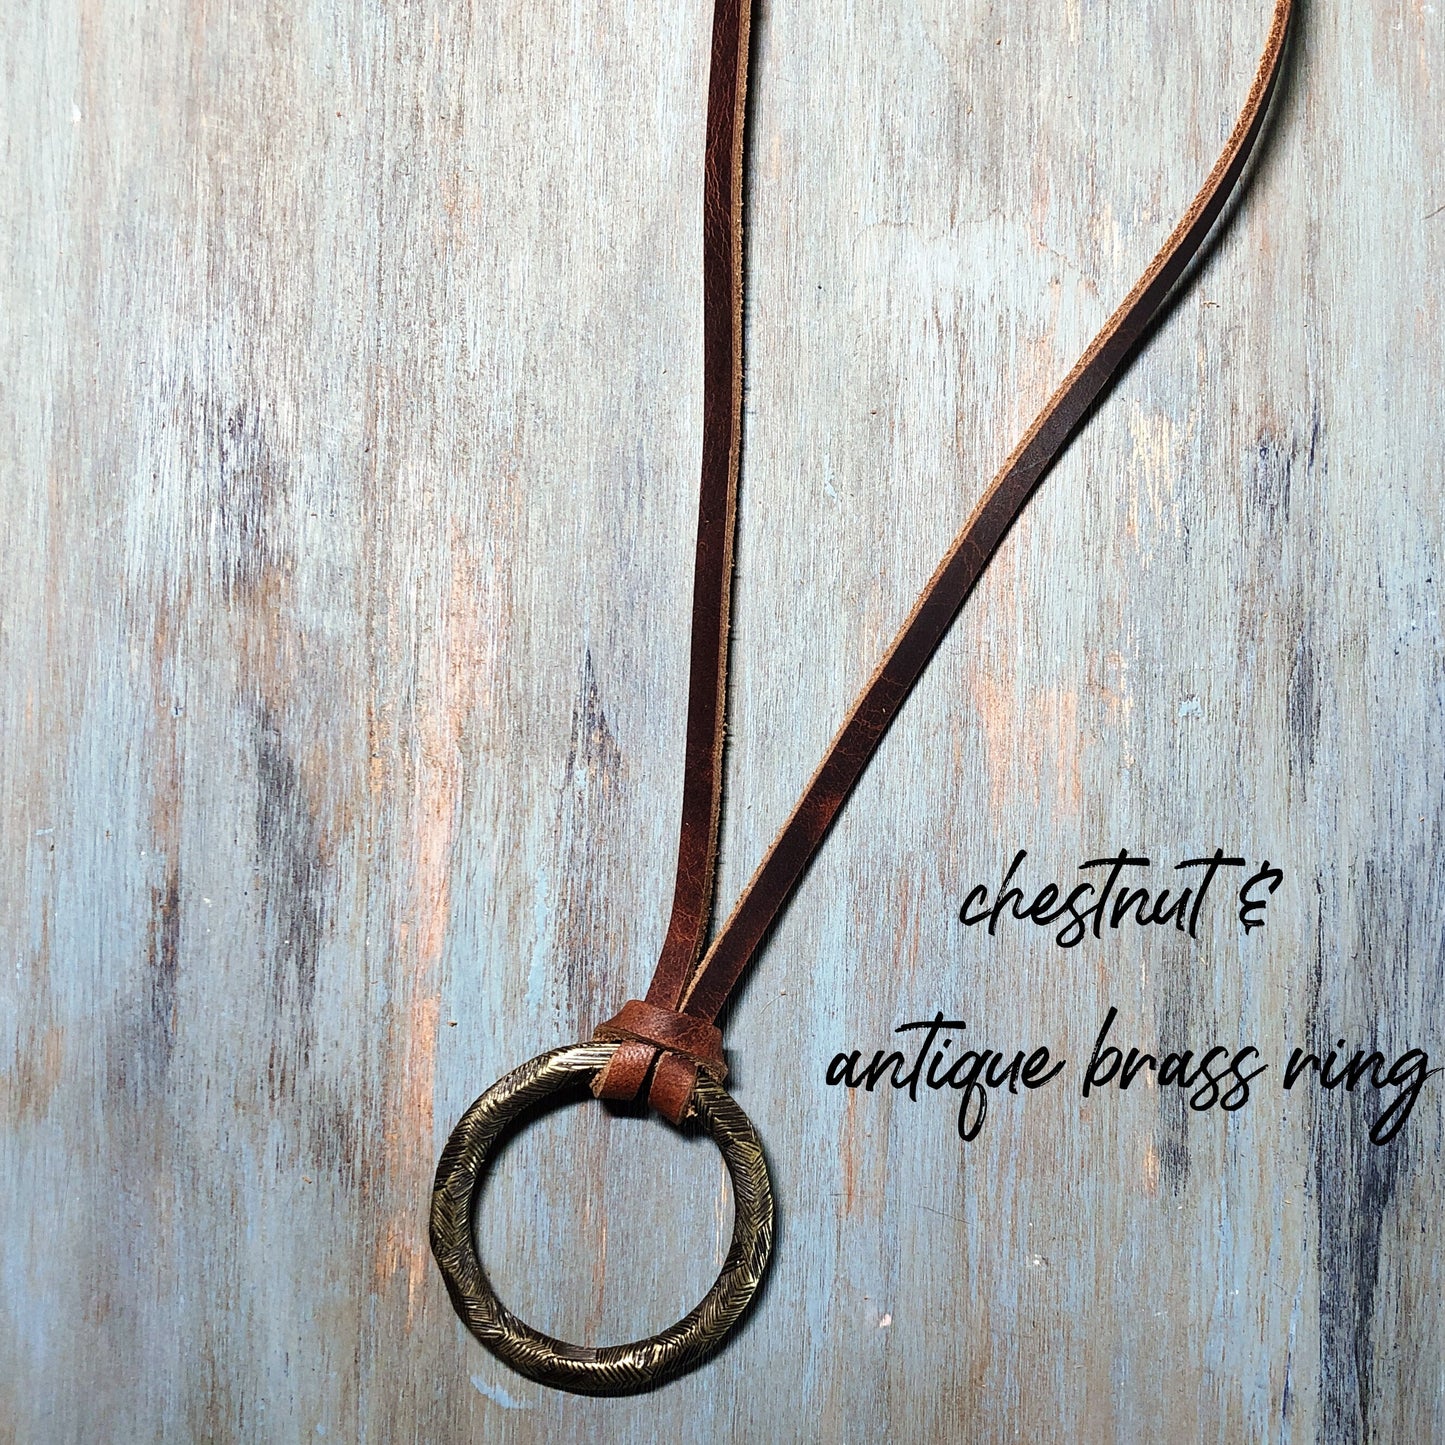 Leather necklace for women, Leather jewelry for women, Layering necklace, Boho leather necklace